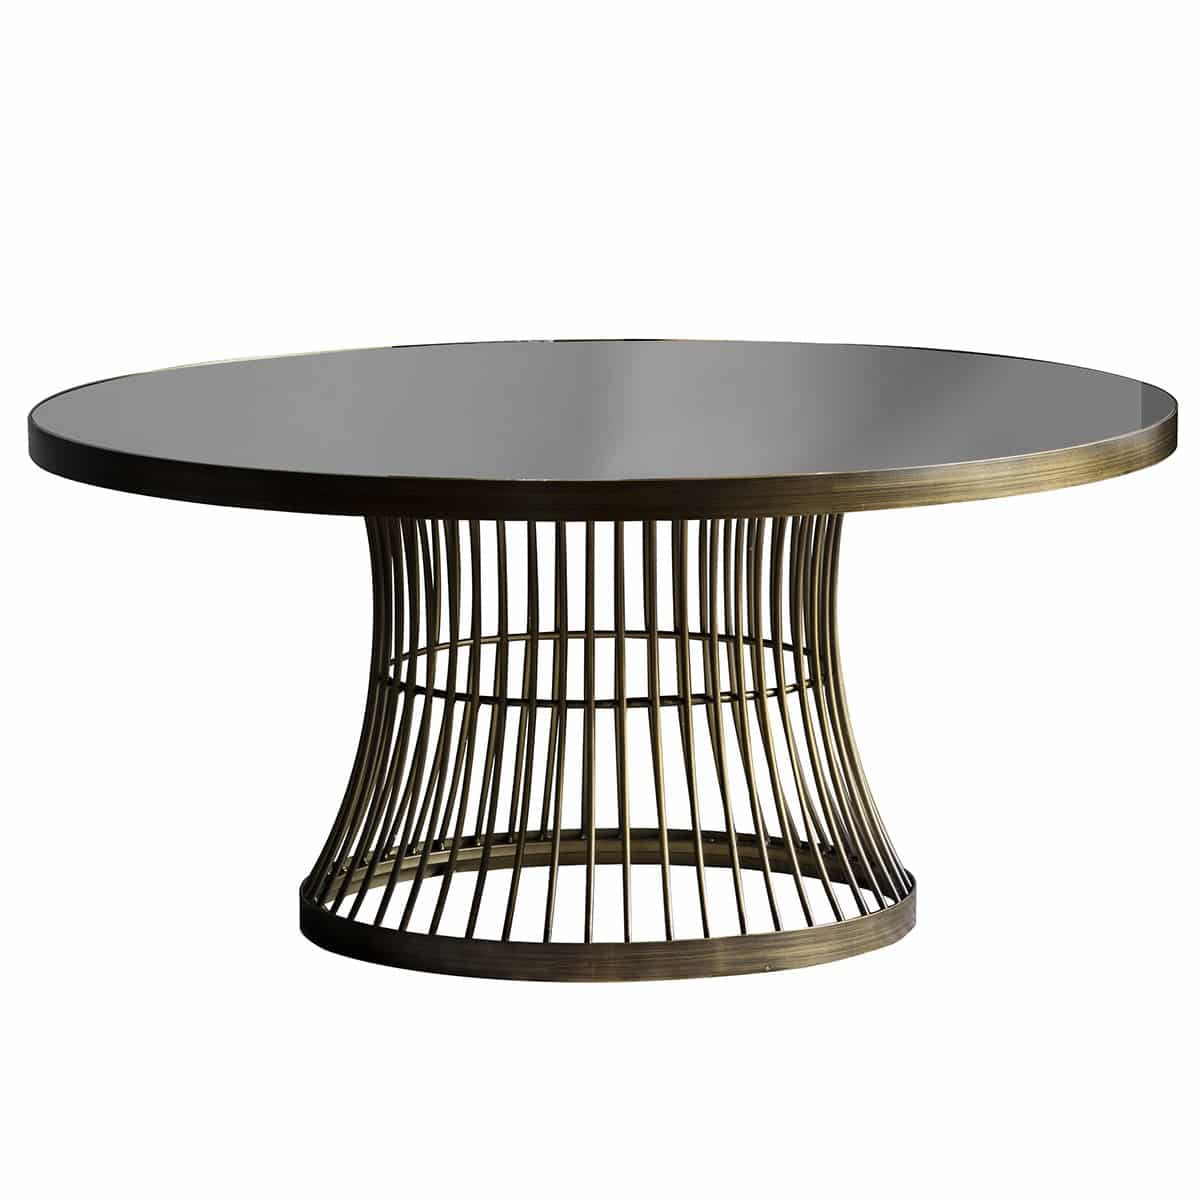 Paddy Metal Round Coffee Table, 90cm, Black / Antique Brass